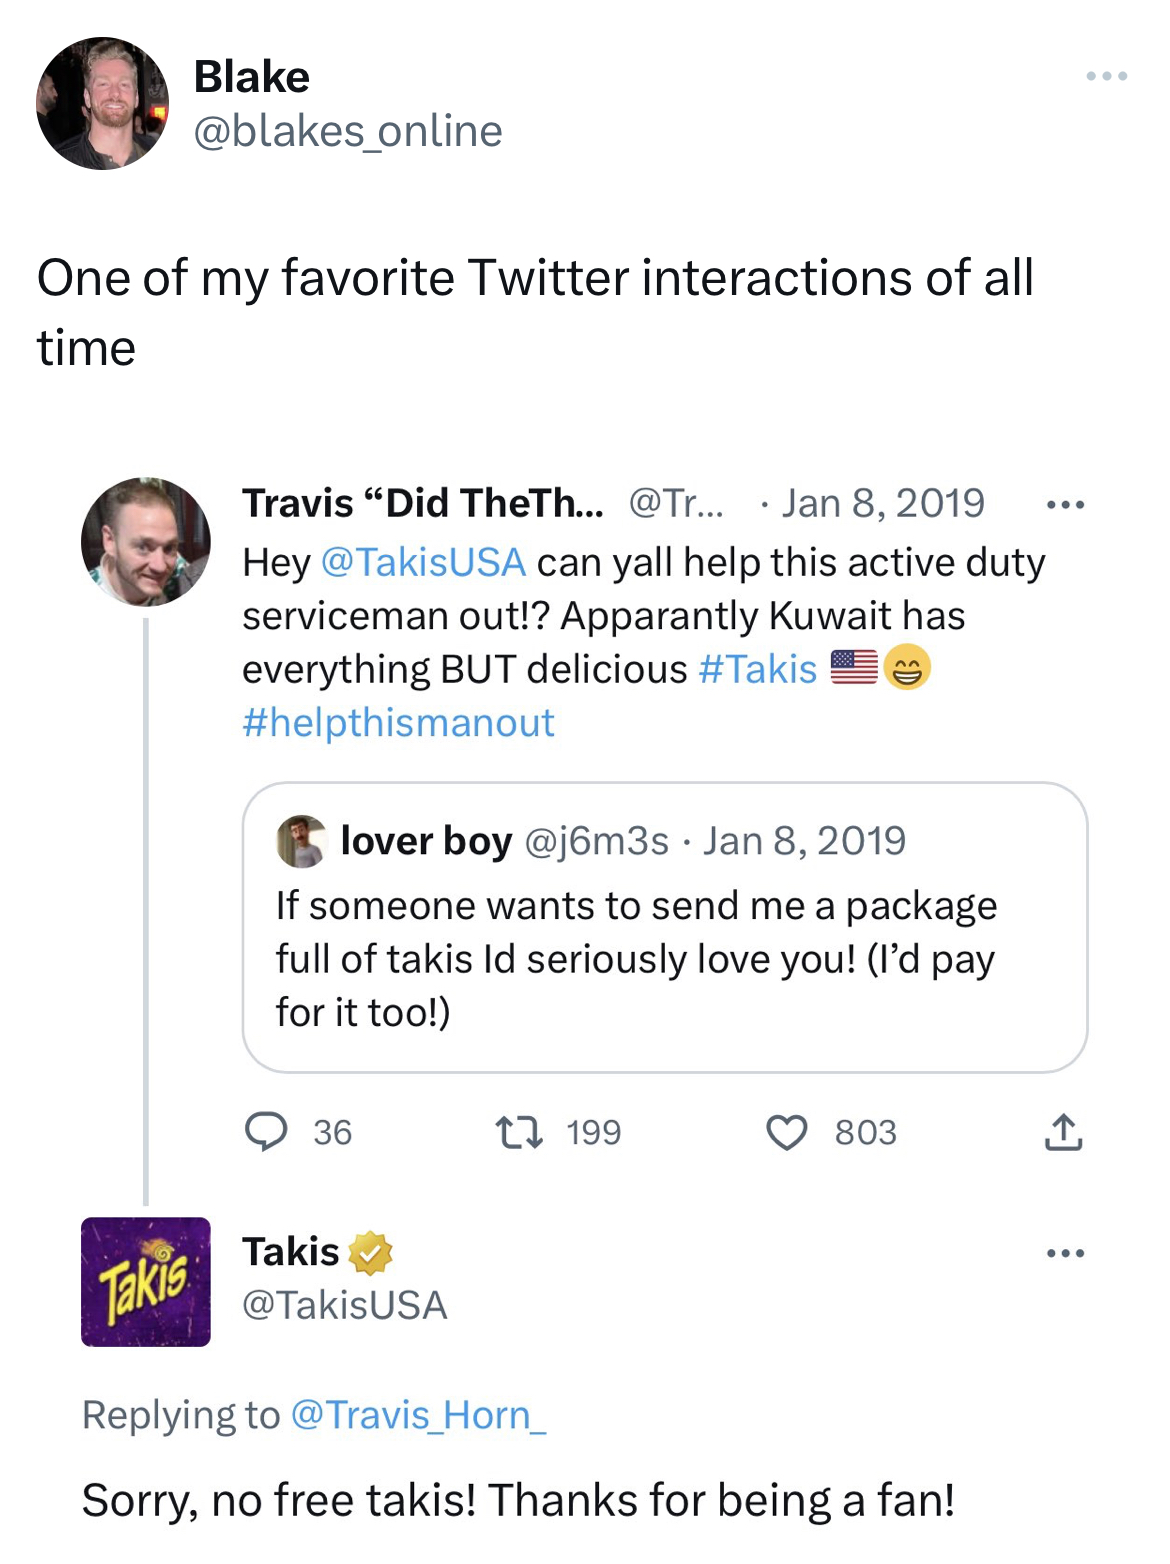 savage tweets - document - Blake Takis One of my favorite Twitter interactions of all time Travis "Did TheTh... ... Hey can yall help this active duty serviceman out!? Apparantly Kuwait has everything But delicious lover boy 8, 2019 If someone wants to se